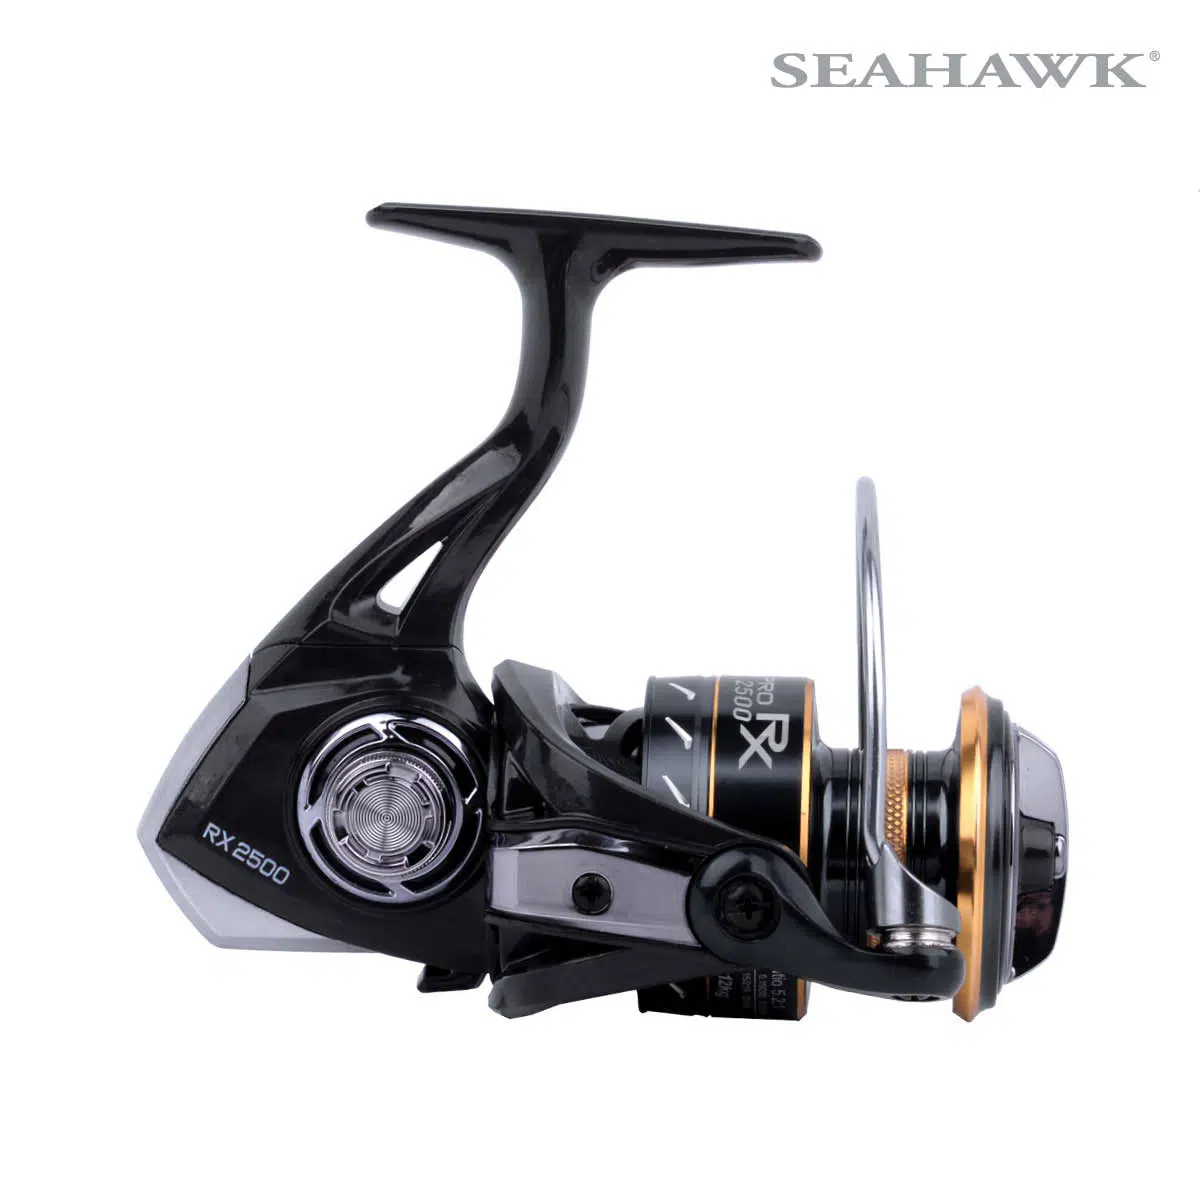 Seahawk Carbon Pro  Carbon Spinning Reel